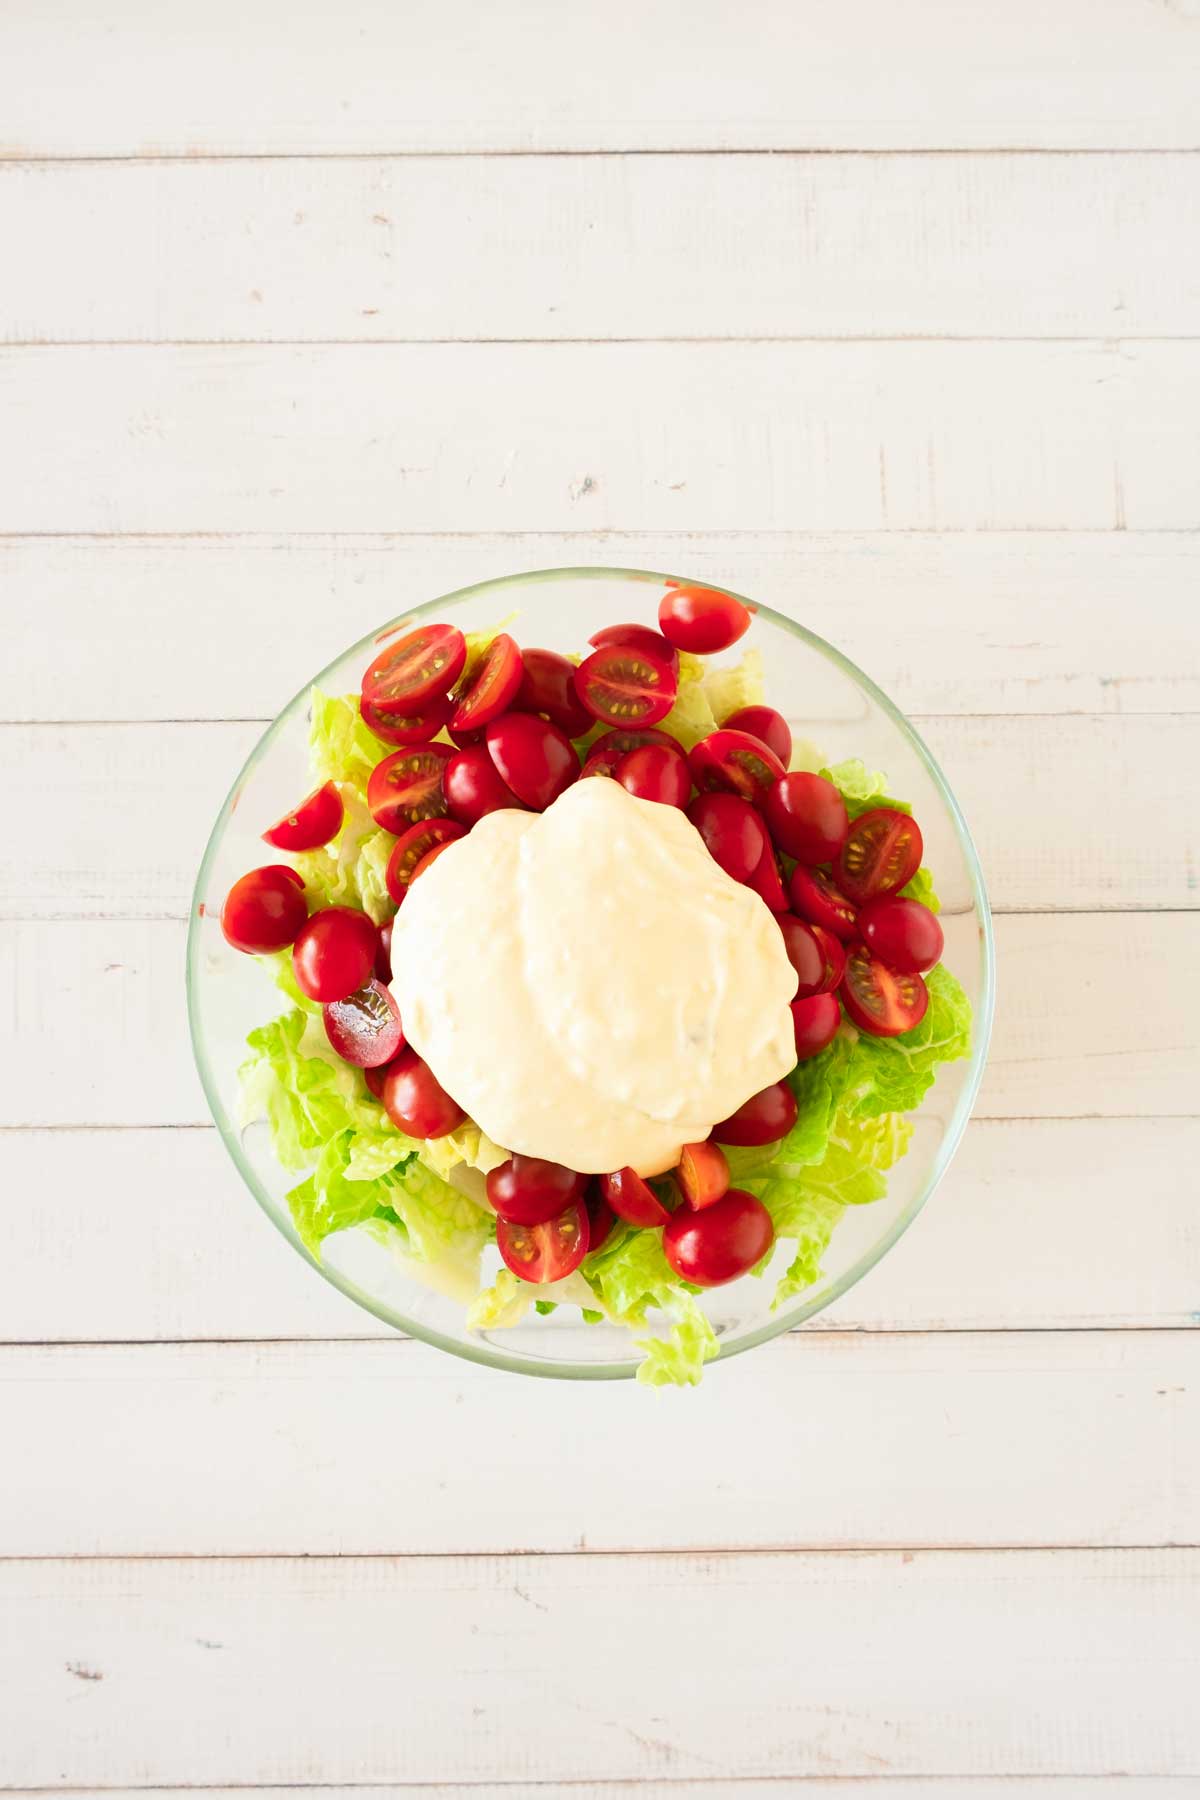 A bowl of salad with lettuce, halved cherry tomatoes, and a scoop of mayonnaise on top, placed on a white wooden surface.